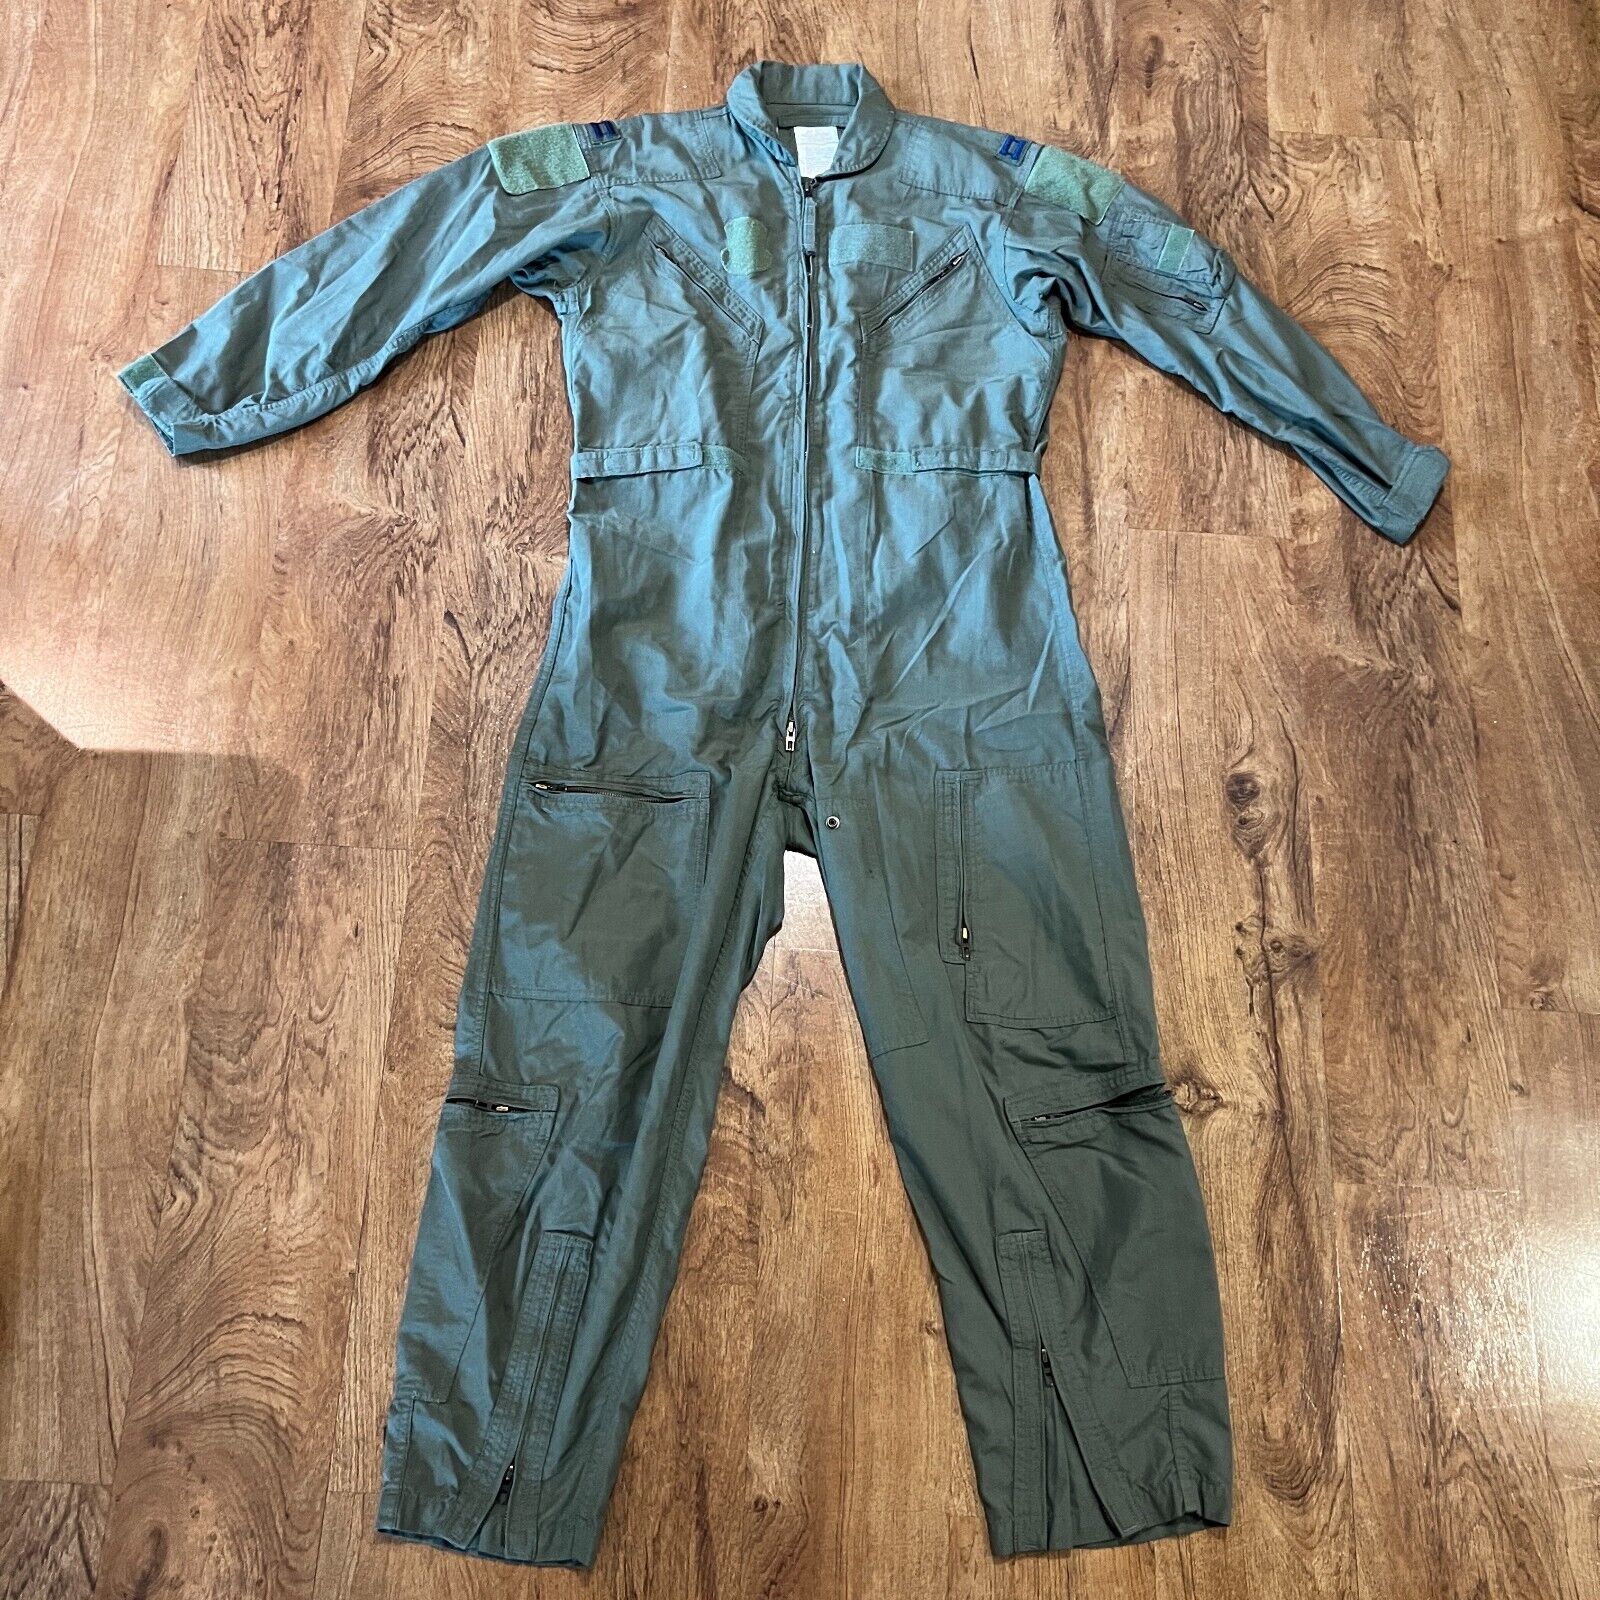 USAF Air Force Flight Suit Coveralls Sage Green 44R US Military Fire Resistant